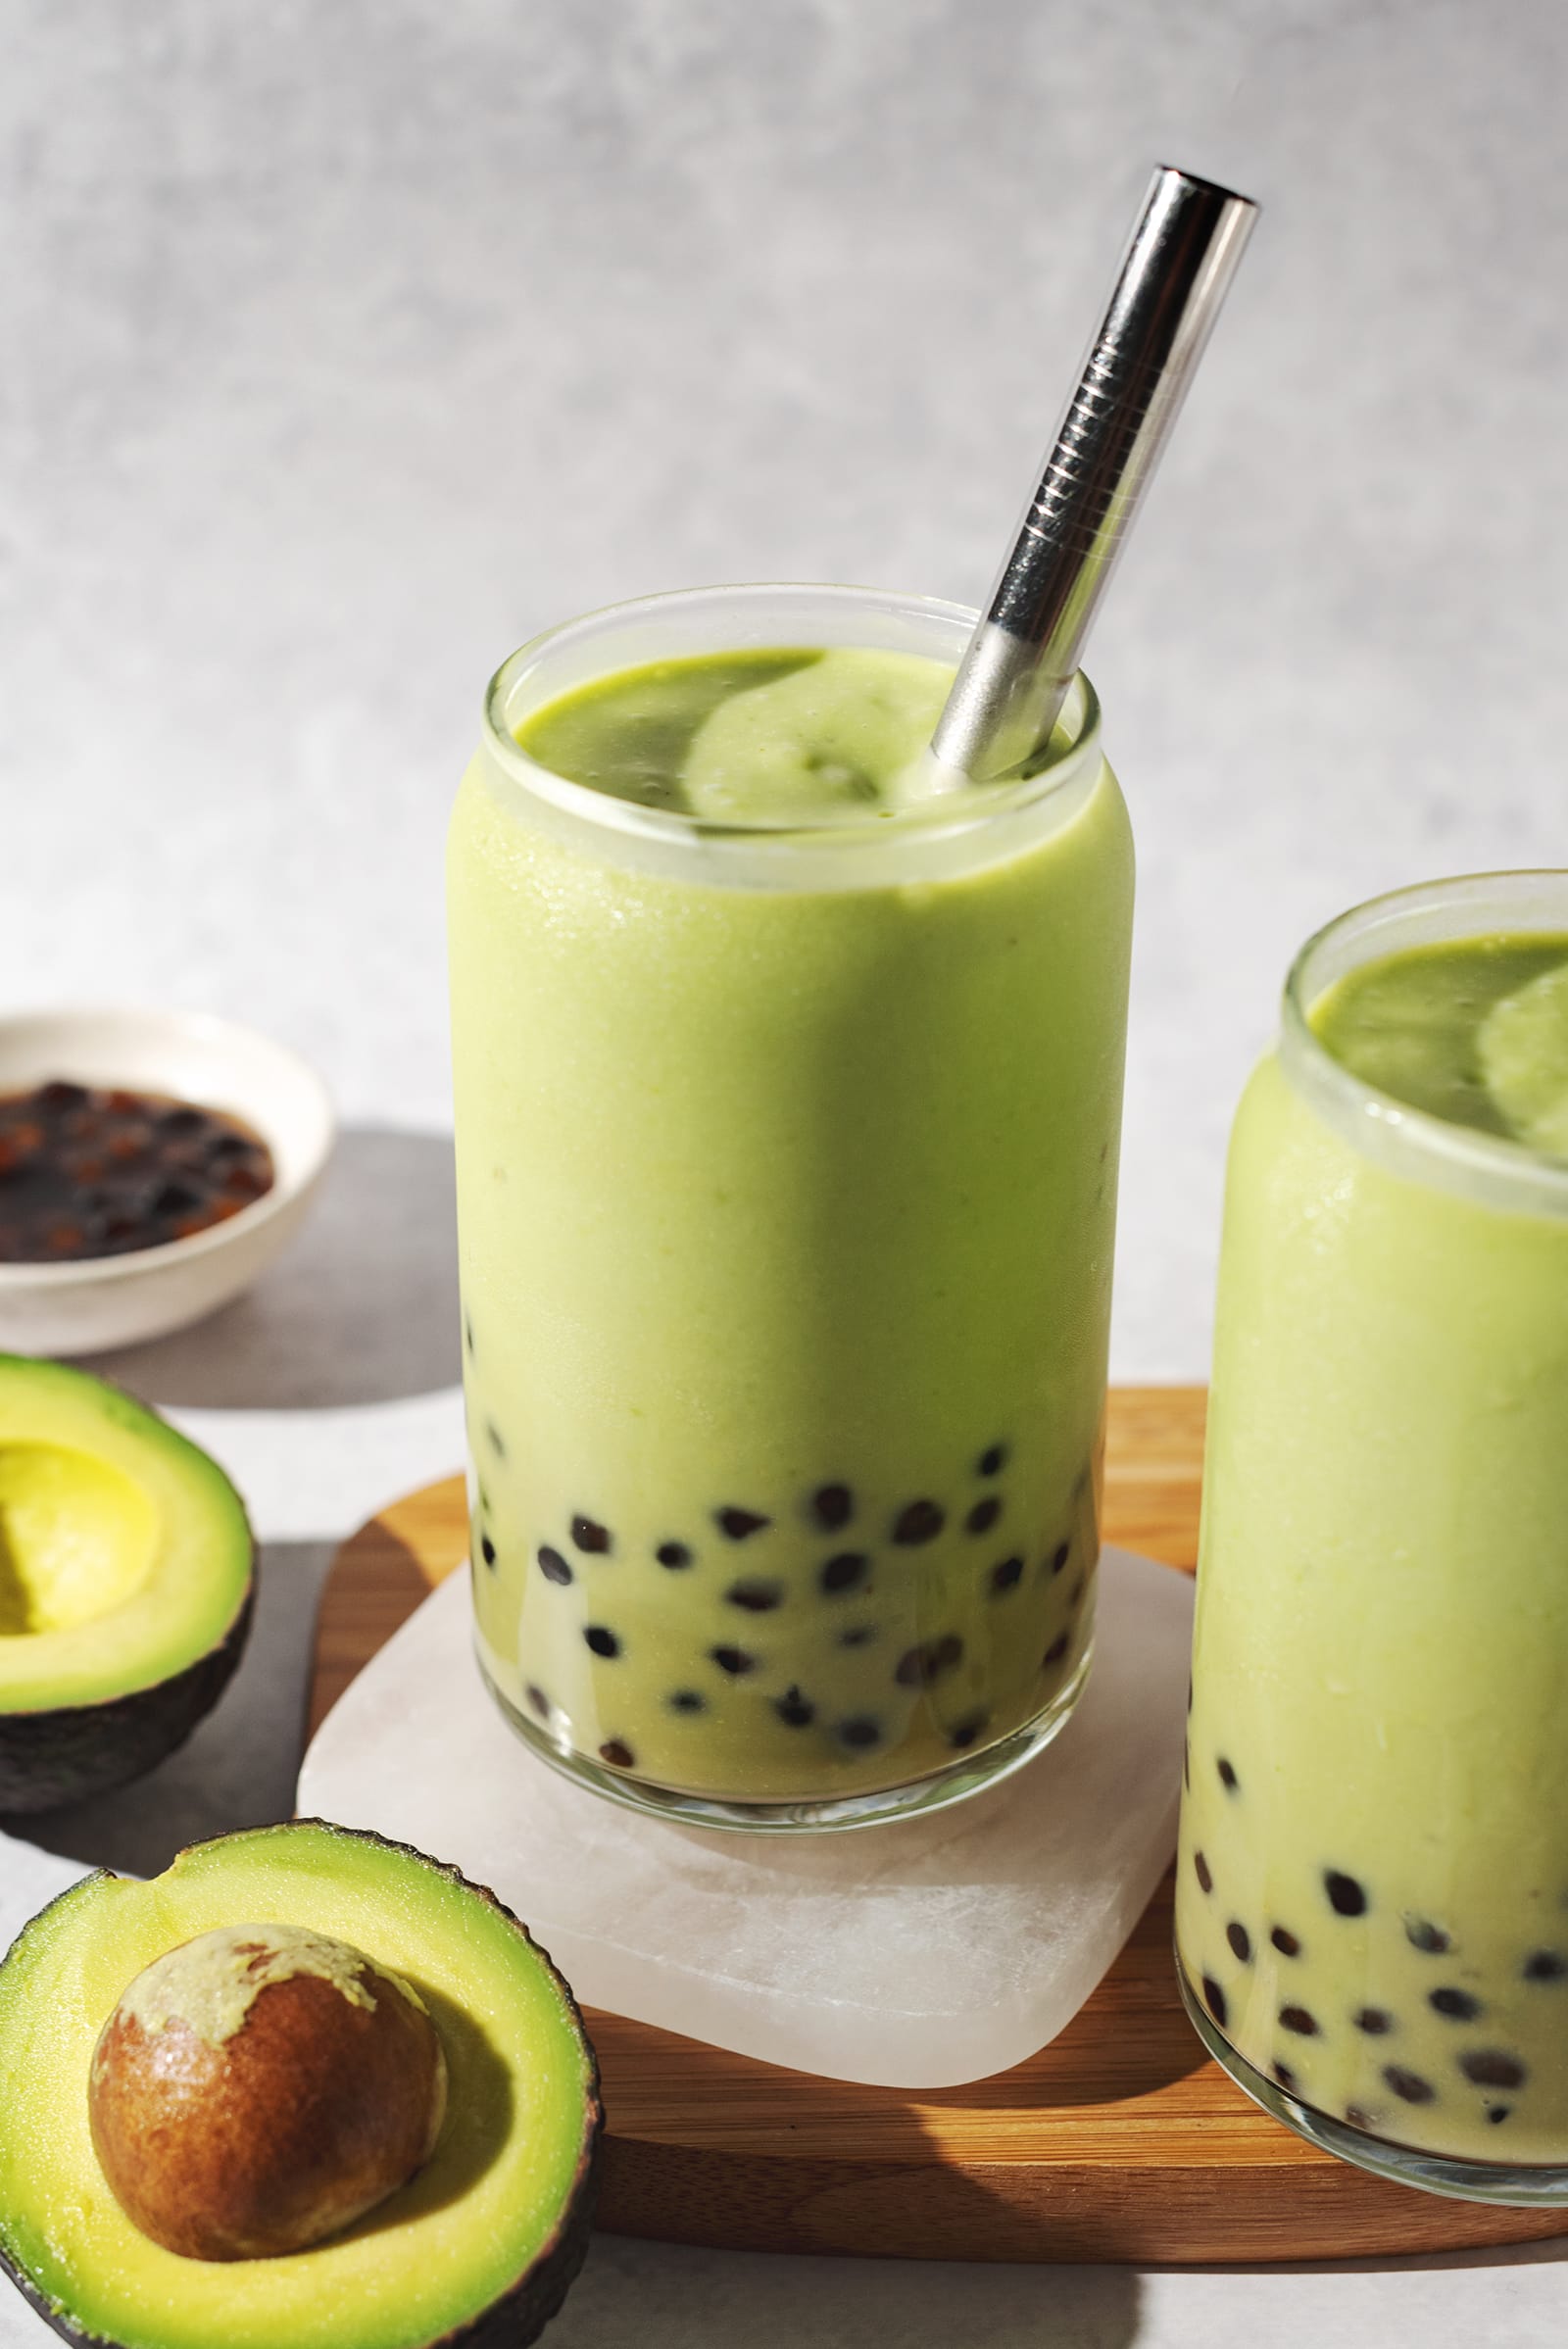 Glass of avocado boba with a metal straw on a coaster.